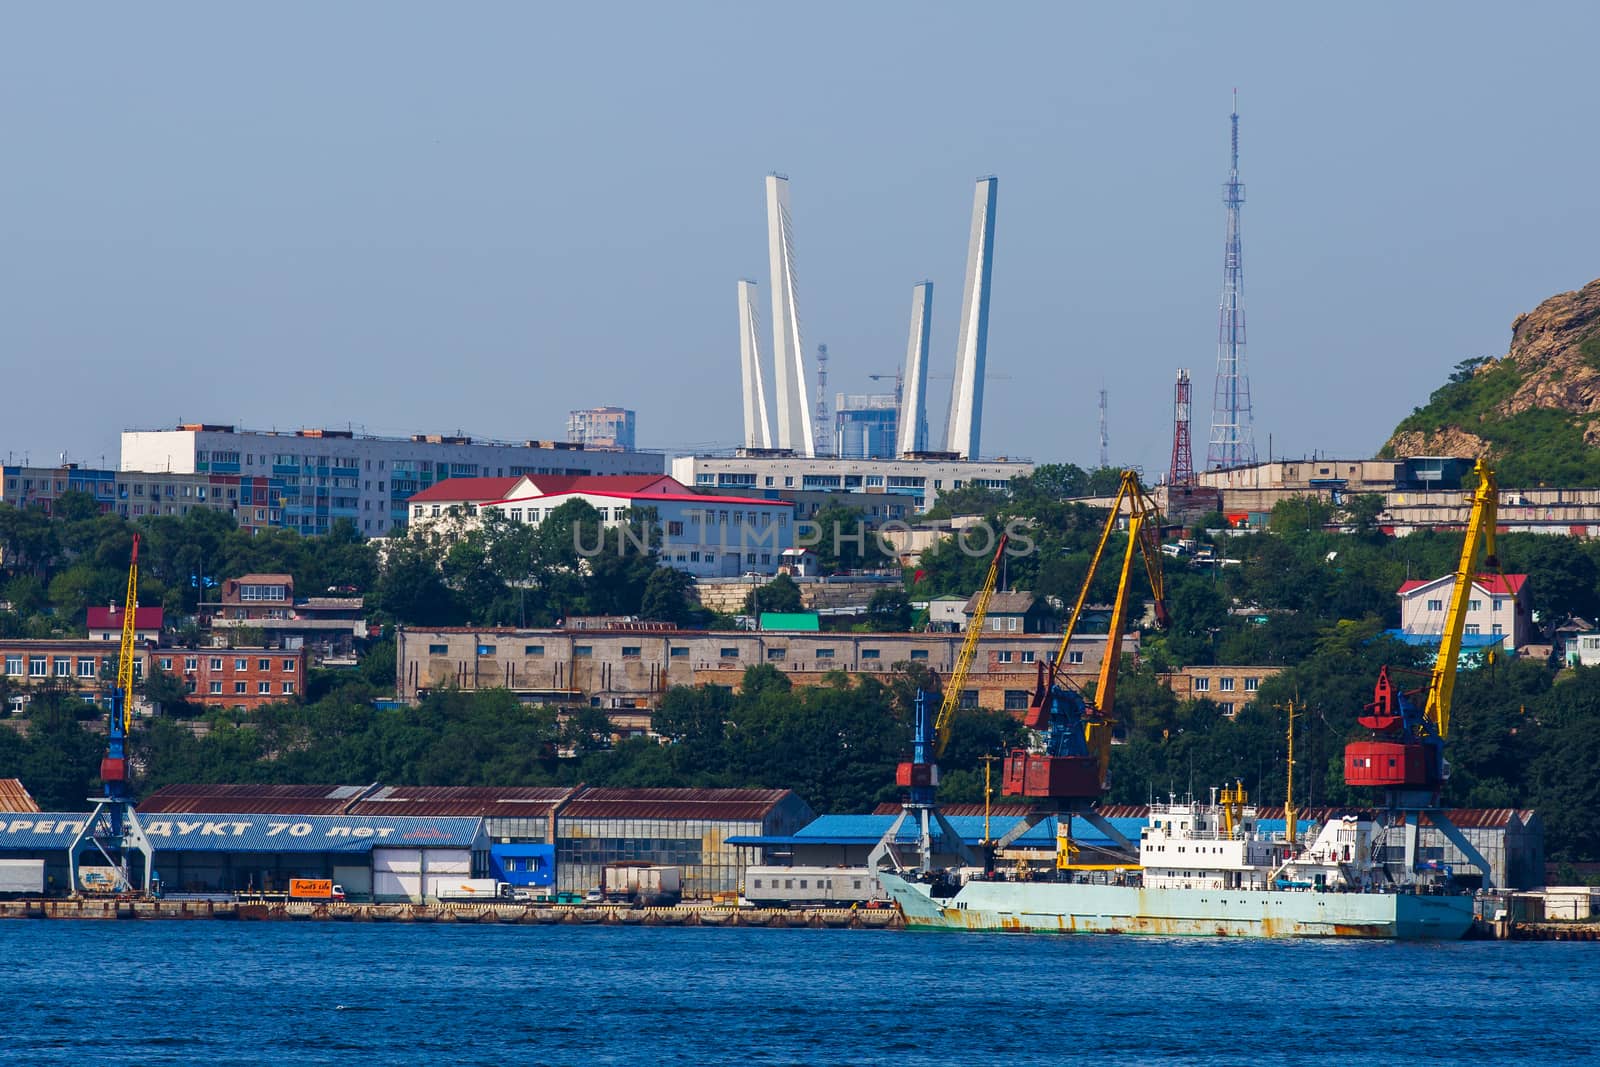 Vladivostok Marine Facade. Commercial seaport from the sea side.